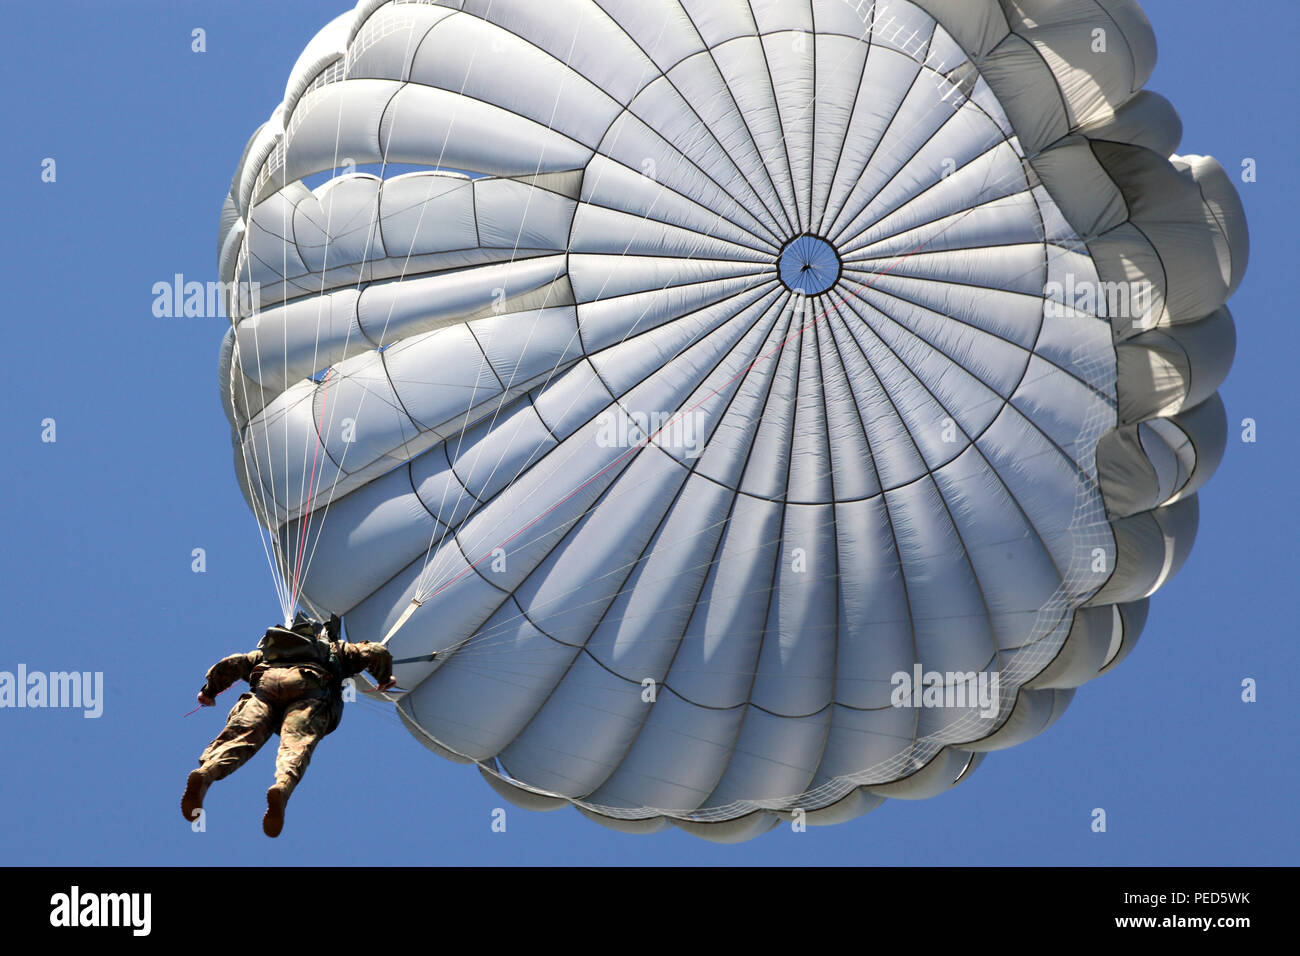 A U.S. Army paratrooper descends onto the drop zone during Leapfest in West Kingston, R.I., Aug.  1, 2015. Leapfest is an International parachute competition hosted by the 56th Troop Command, Rhode Island National Guard to promote high level technical training and esprit de corps within the International Airborne community. (U.S. Army Photo by Spc. Joseph Cathey/Released) Stock Photo